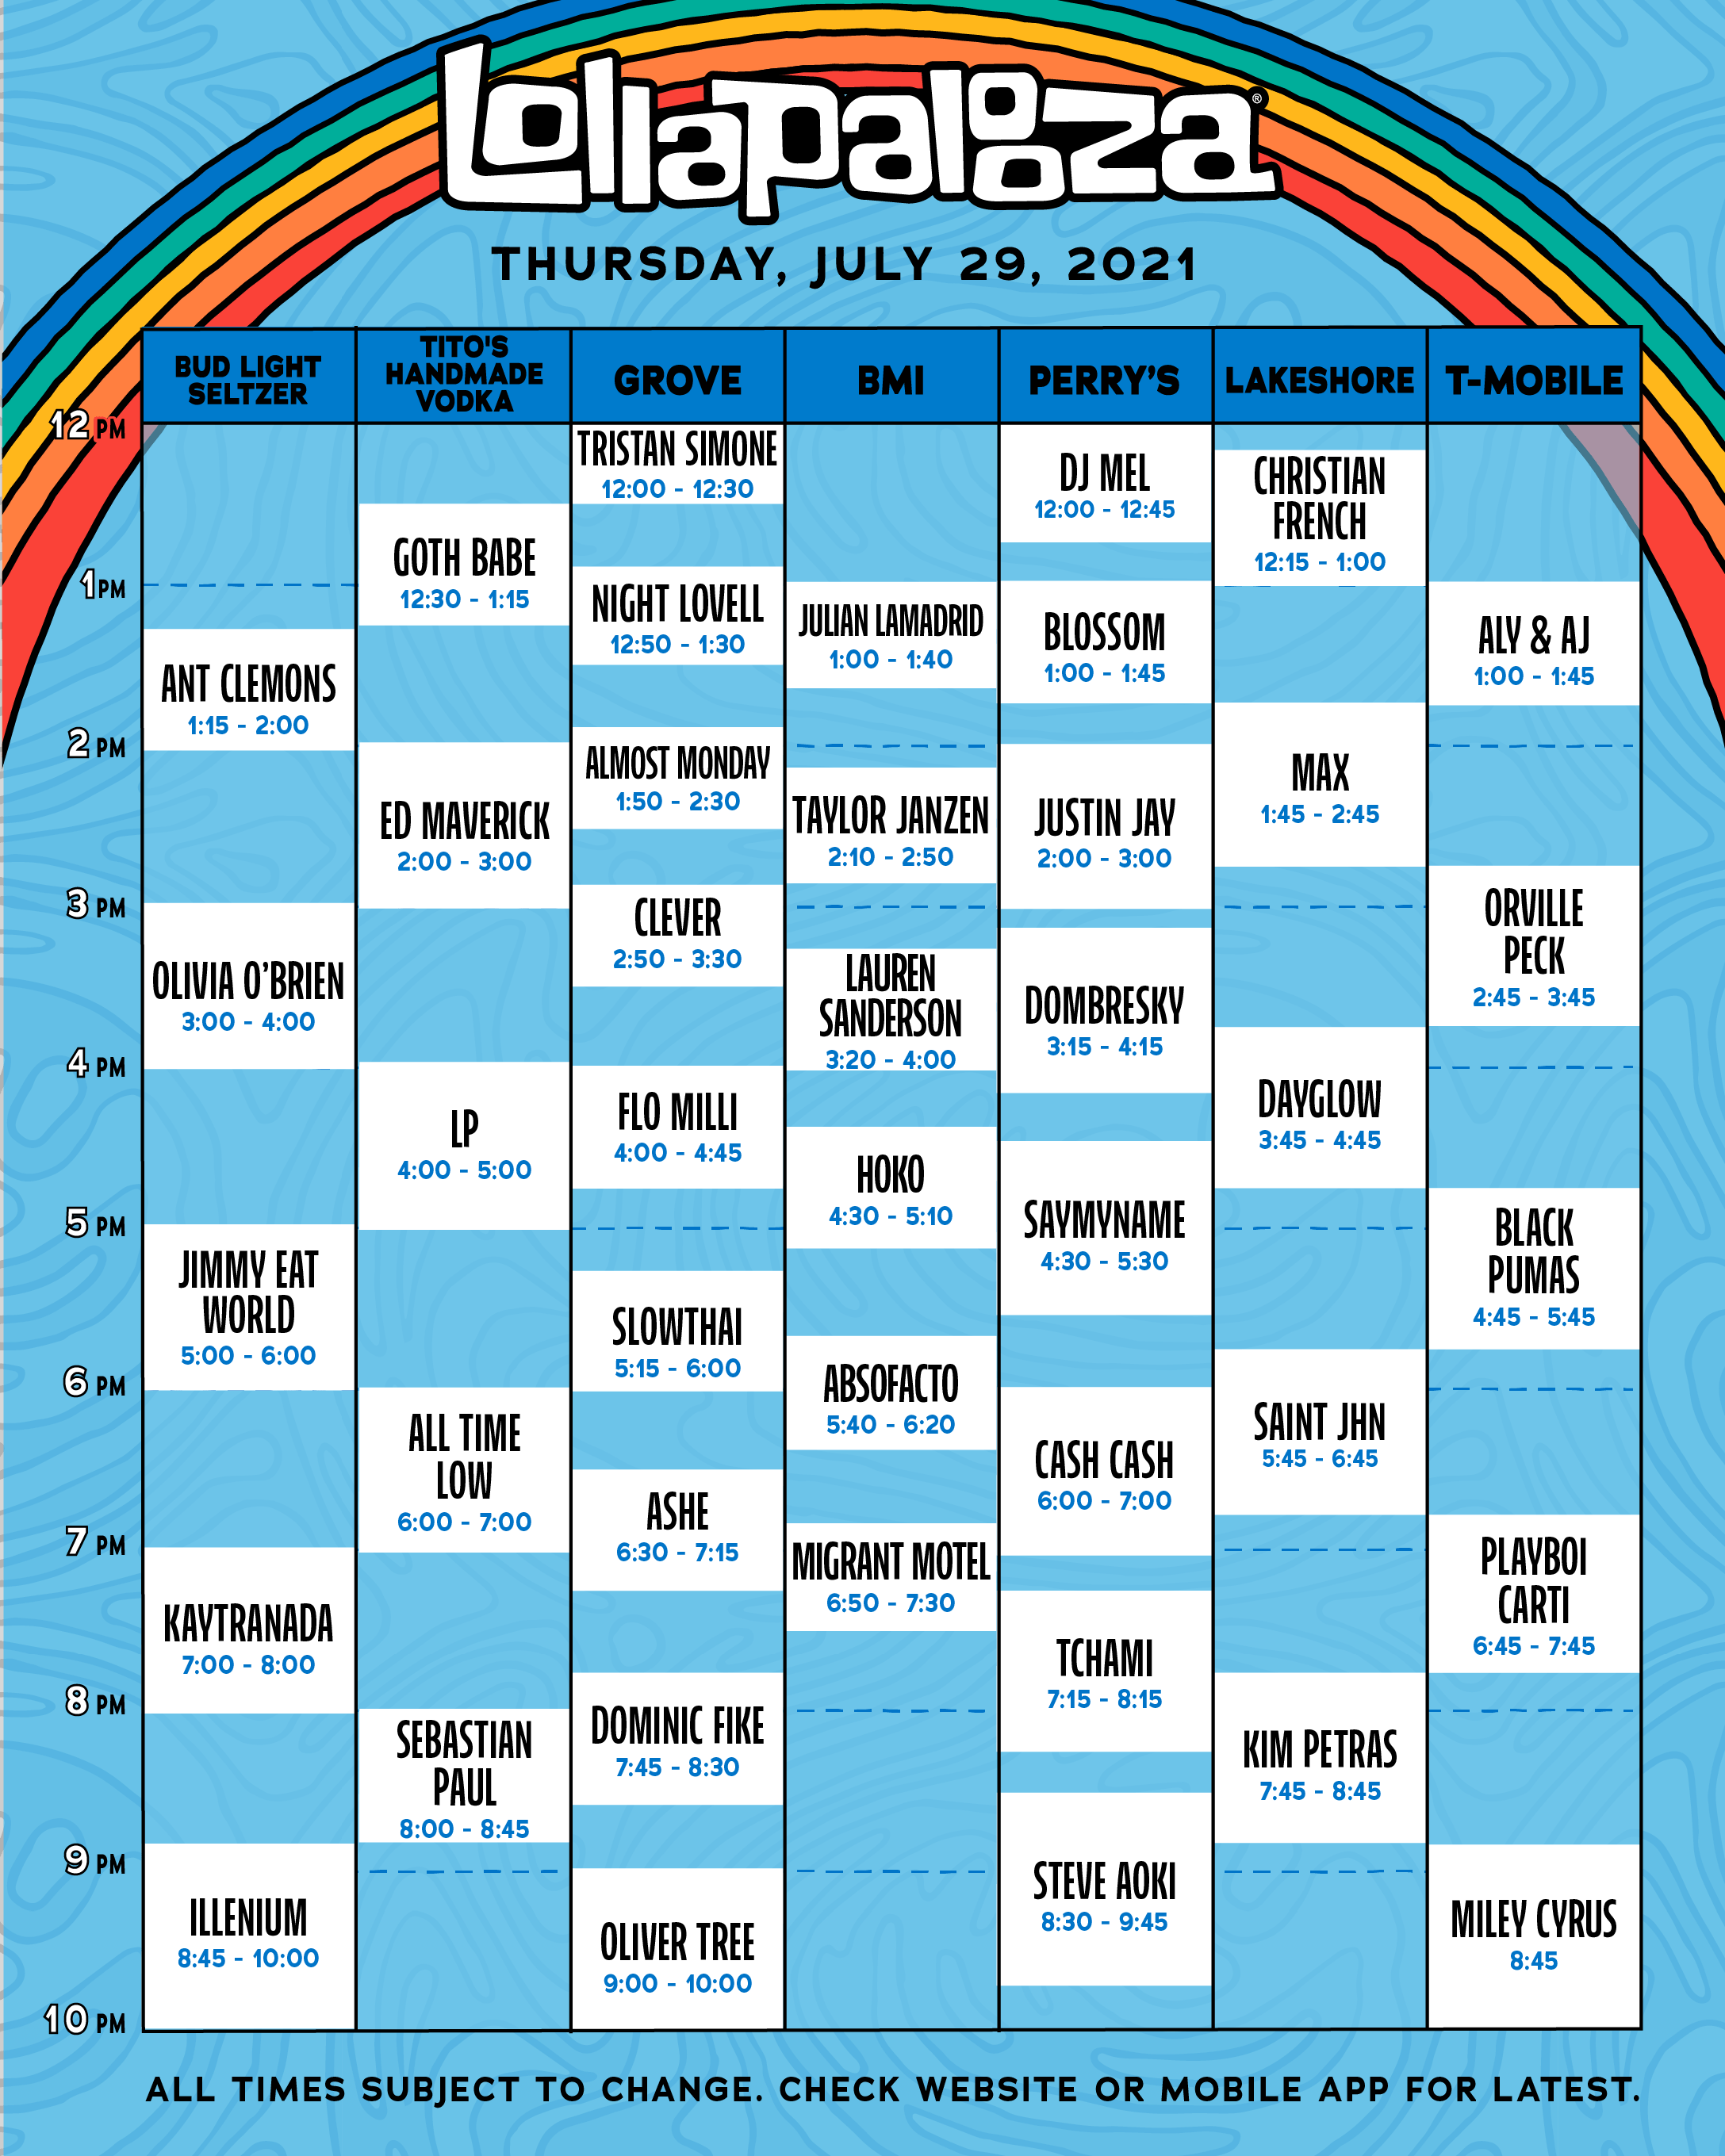 Lollapalooza Full 2021 Schedule Announced! 1